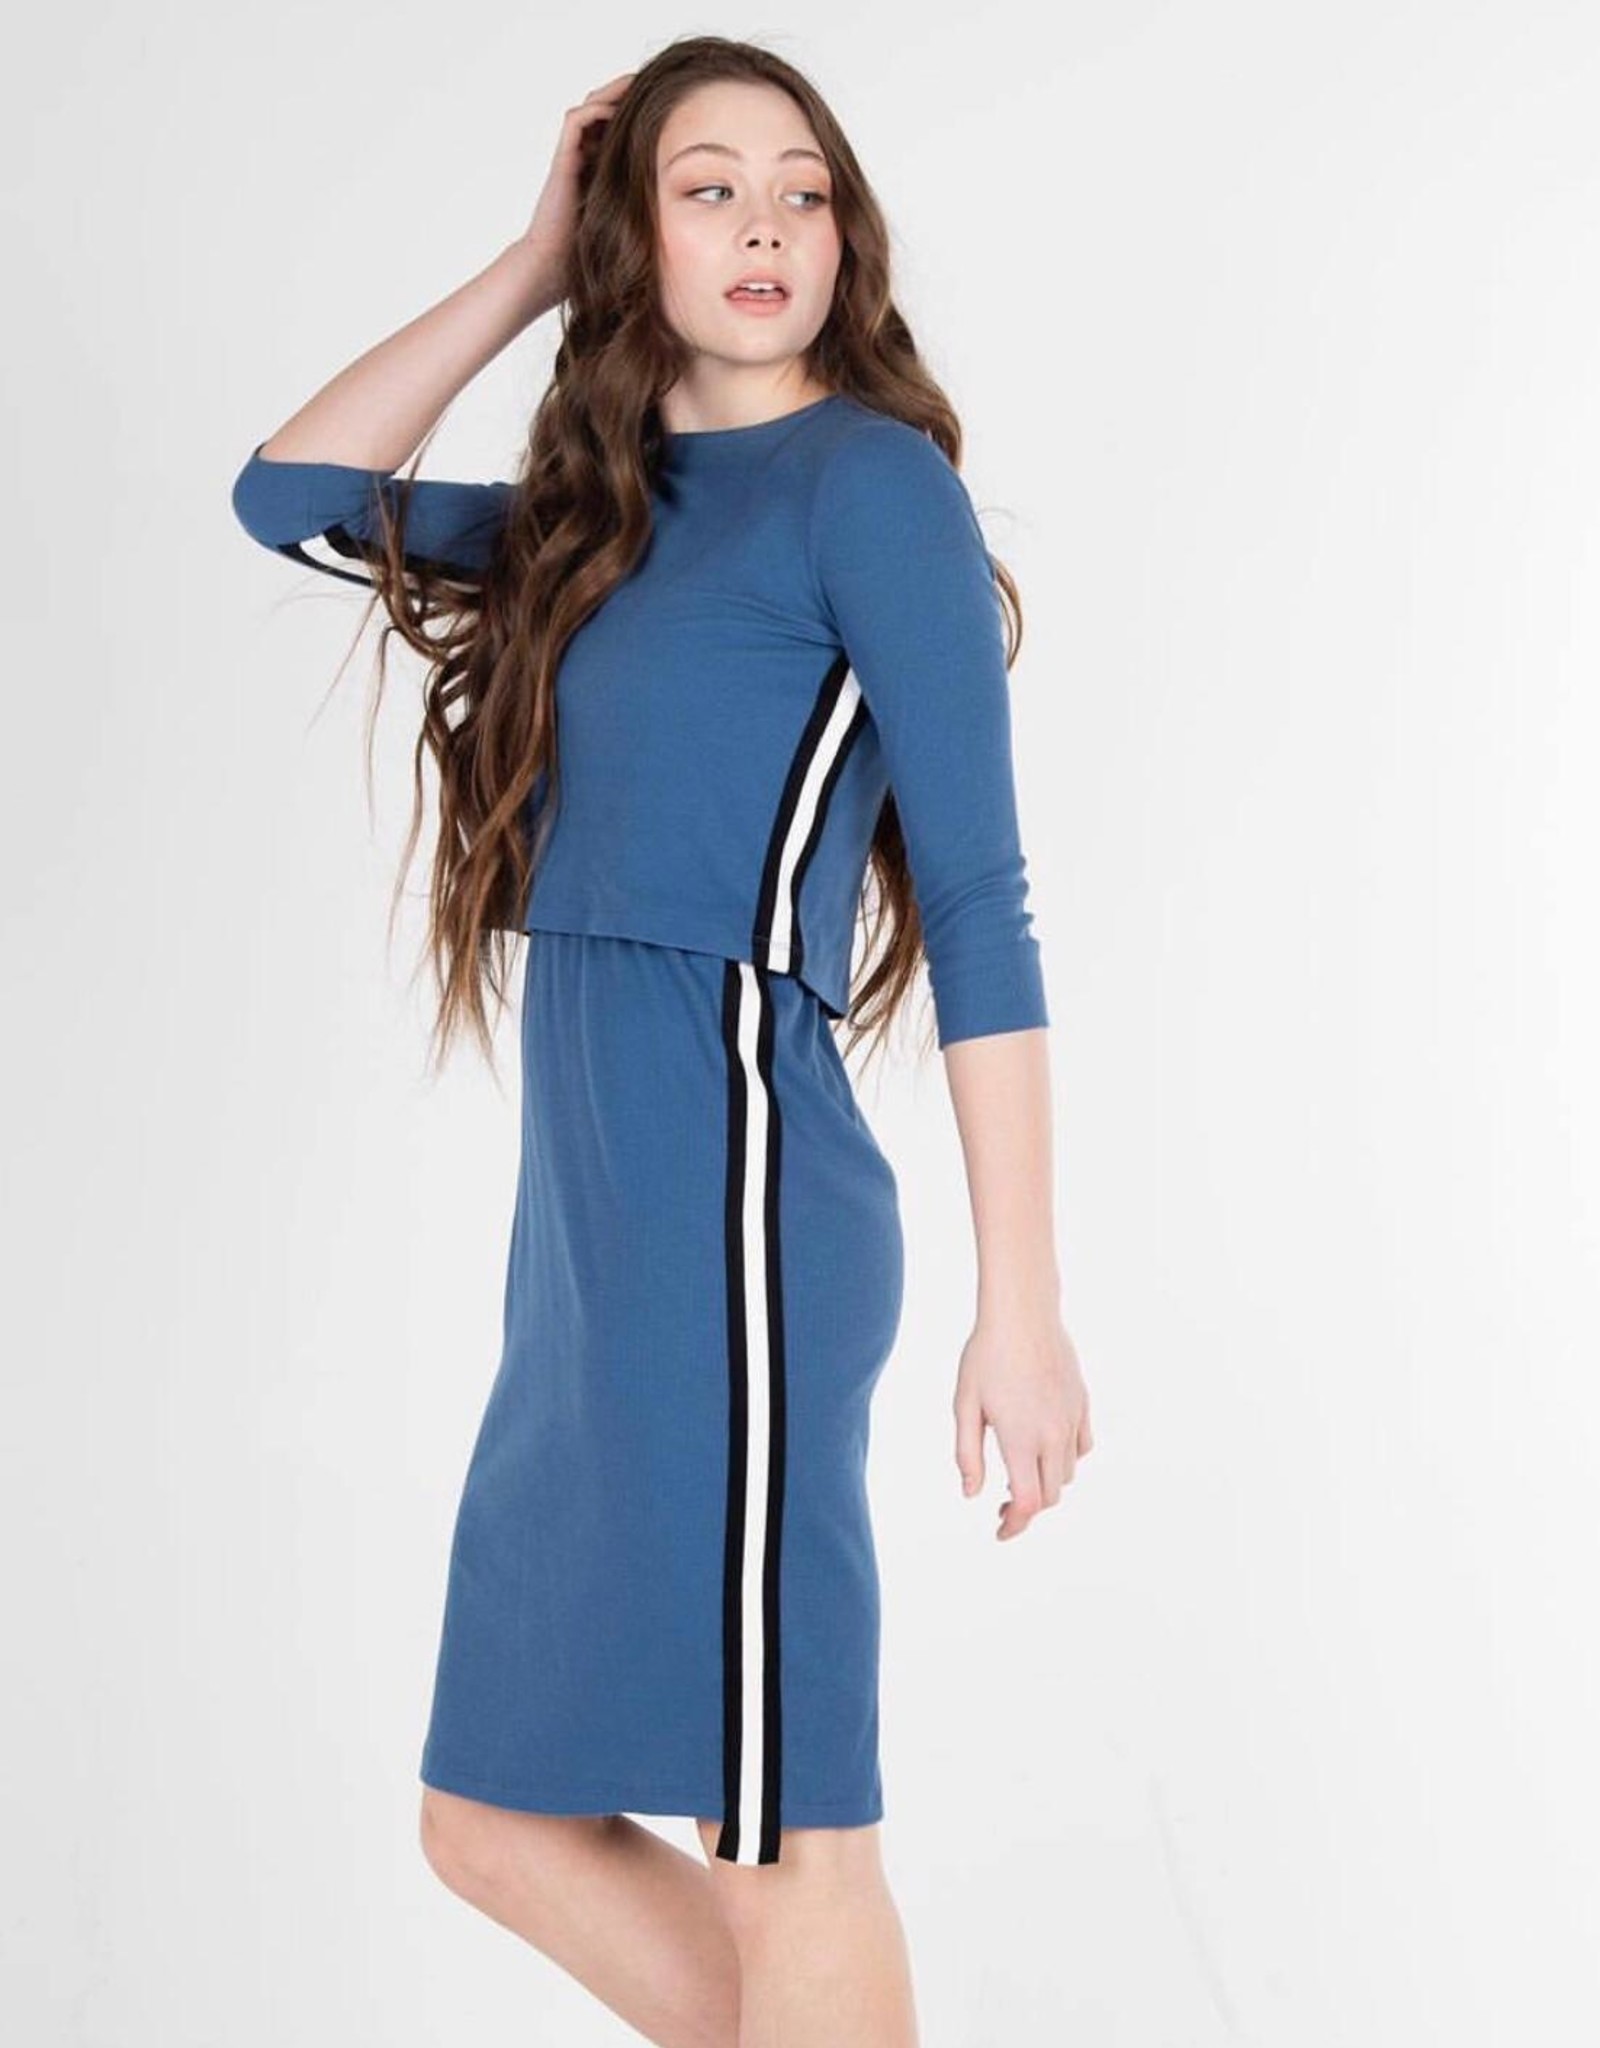 UNCLEAR Unclear Ribbed Overlay Dress with Side Stripe